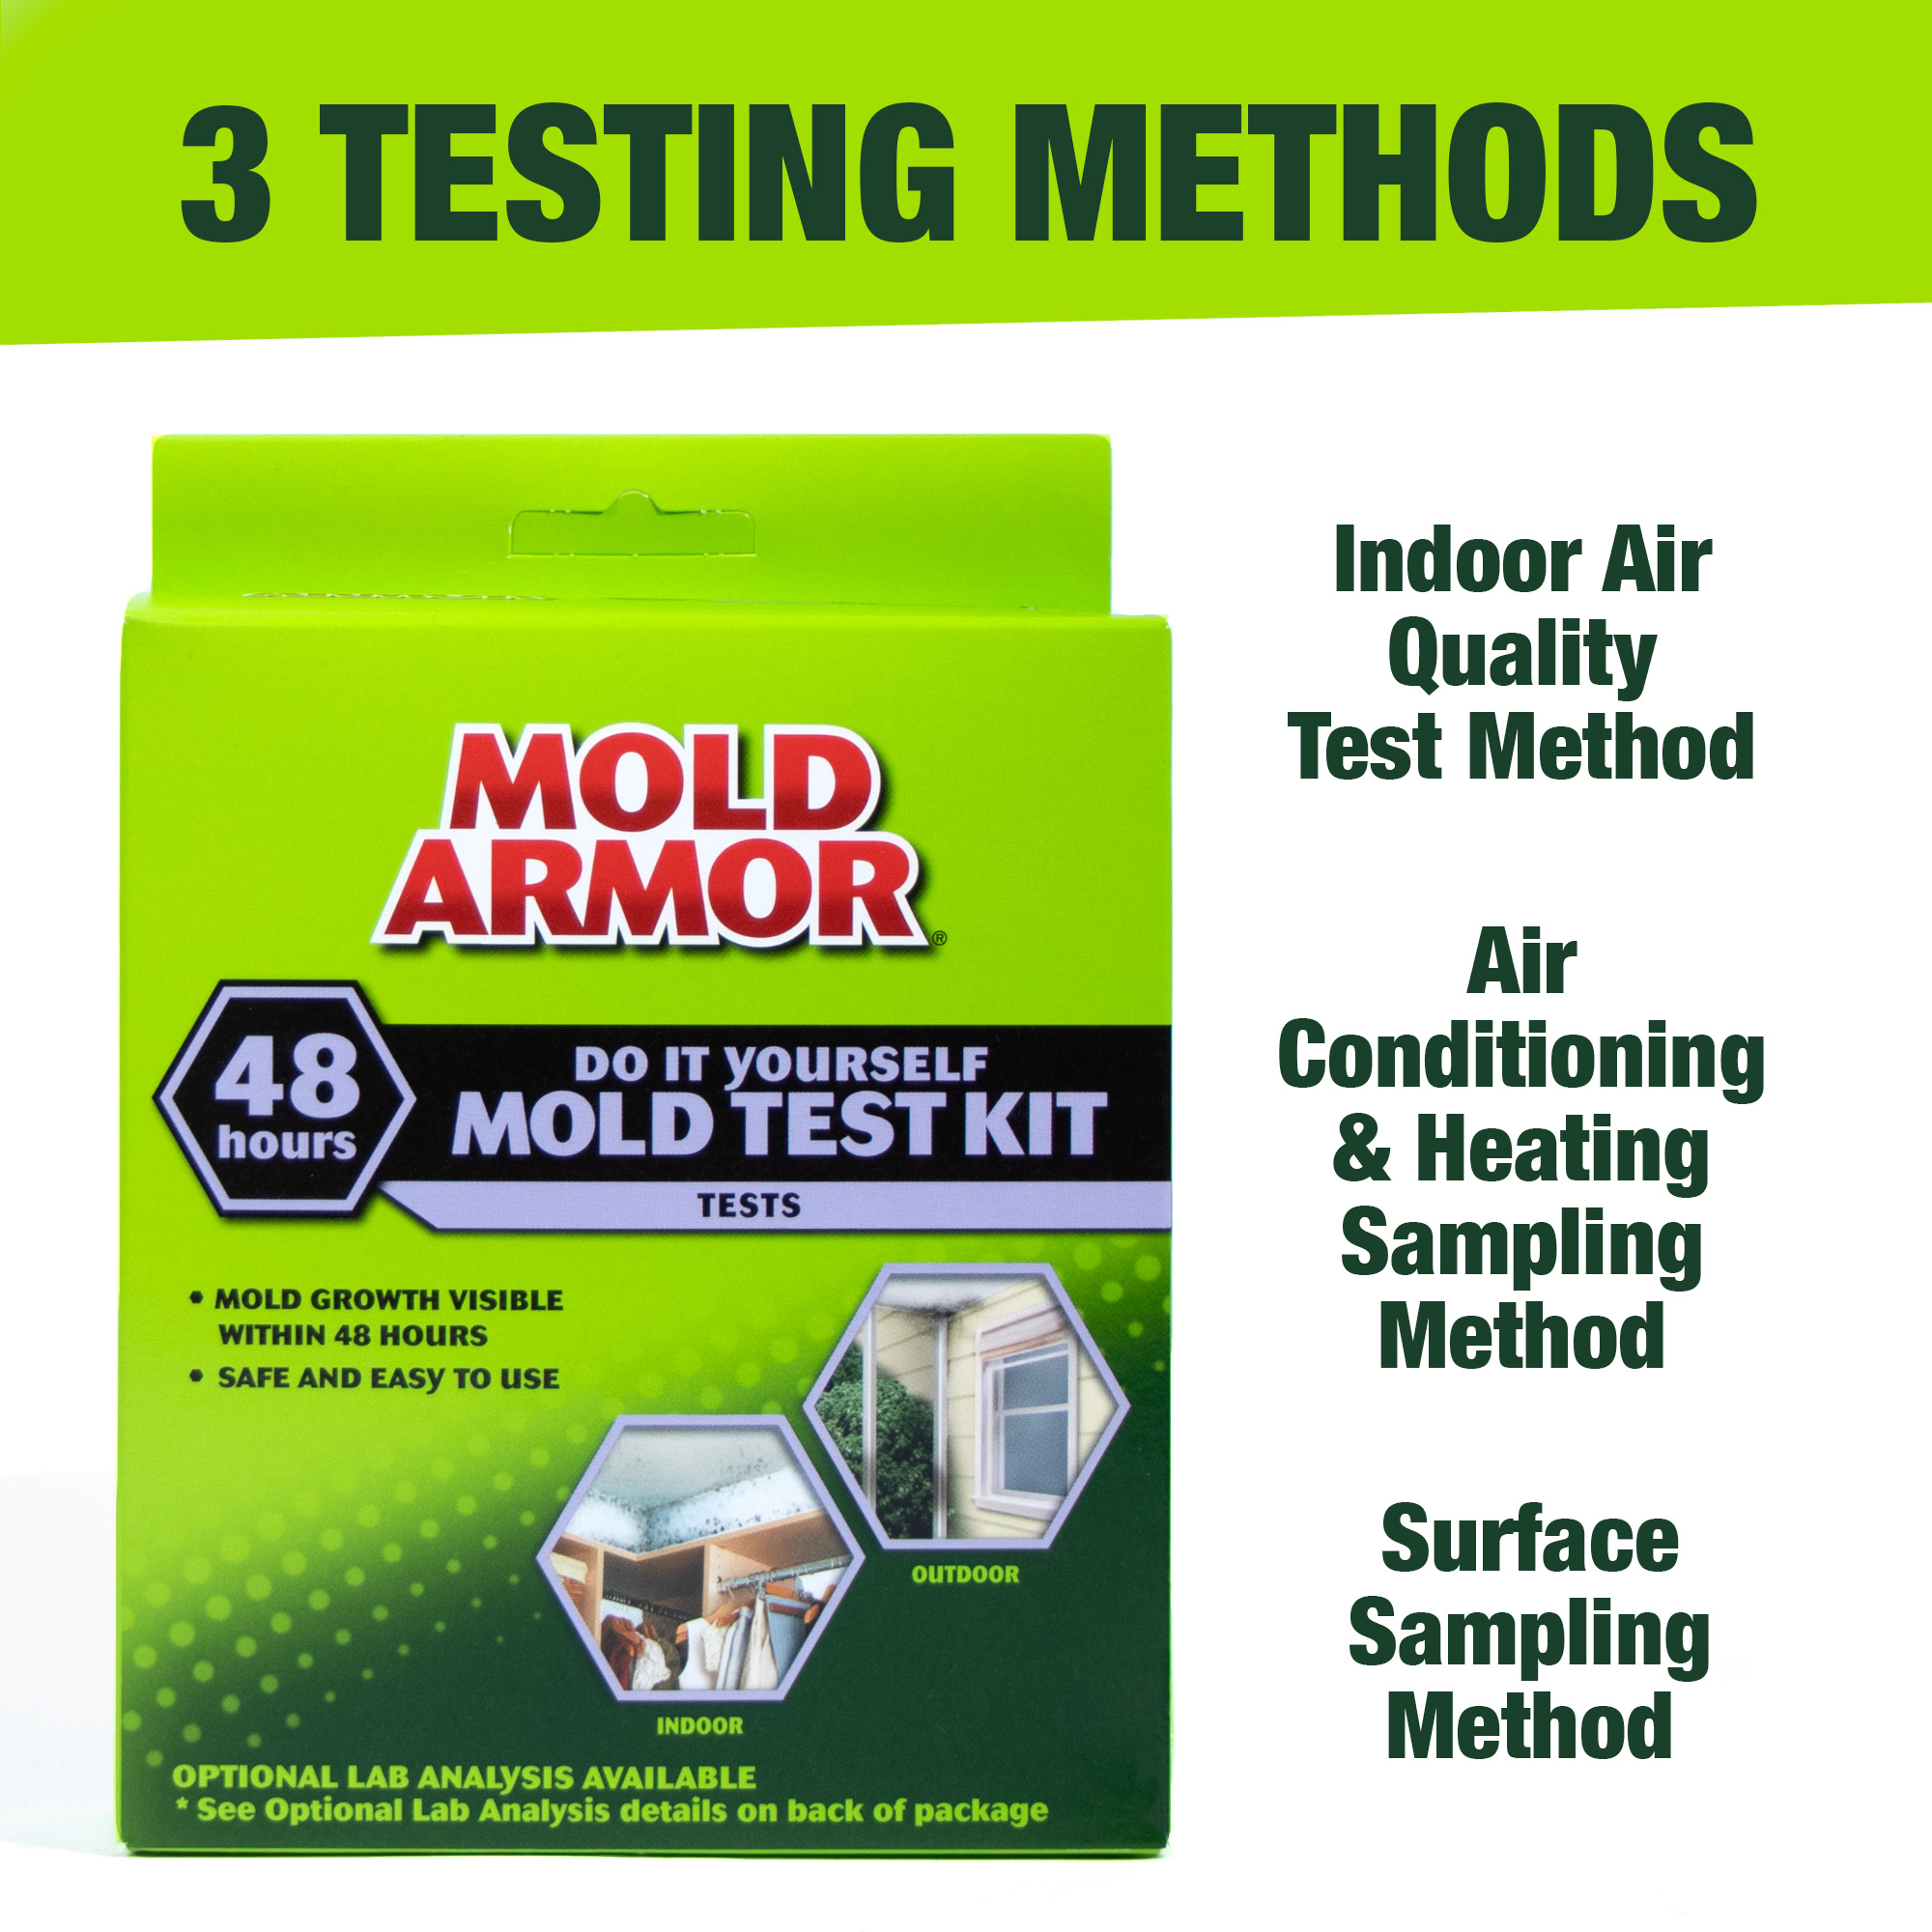 Mold Armor 48 Hours Do It Yourself Mold Test Kit, (00500) FS